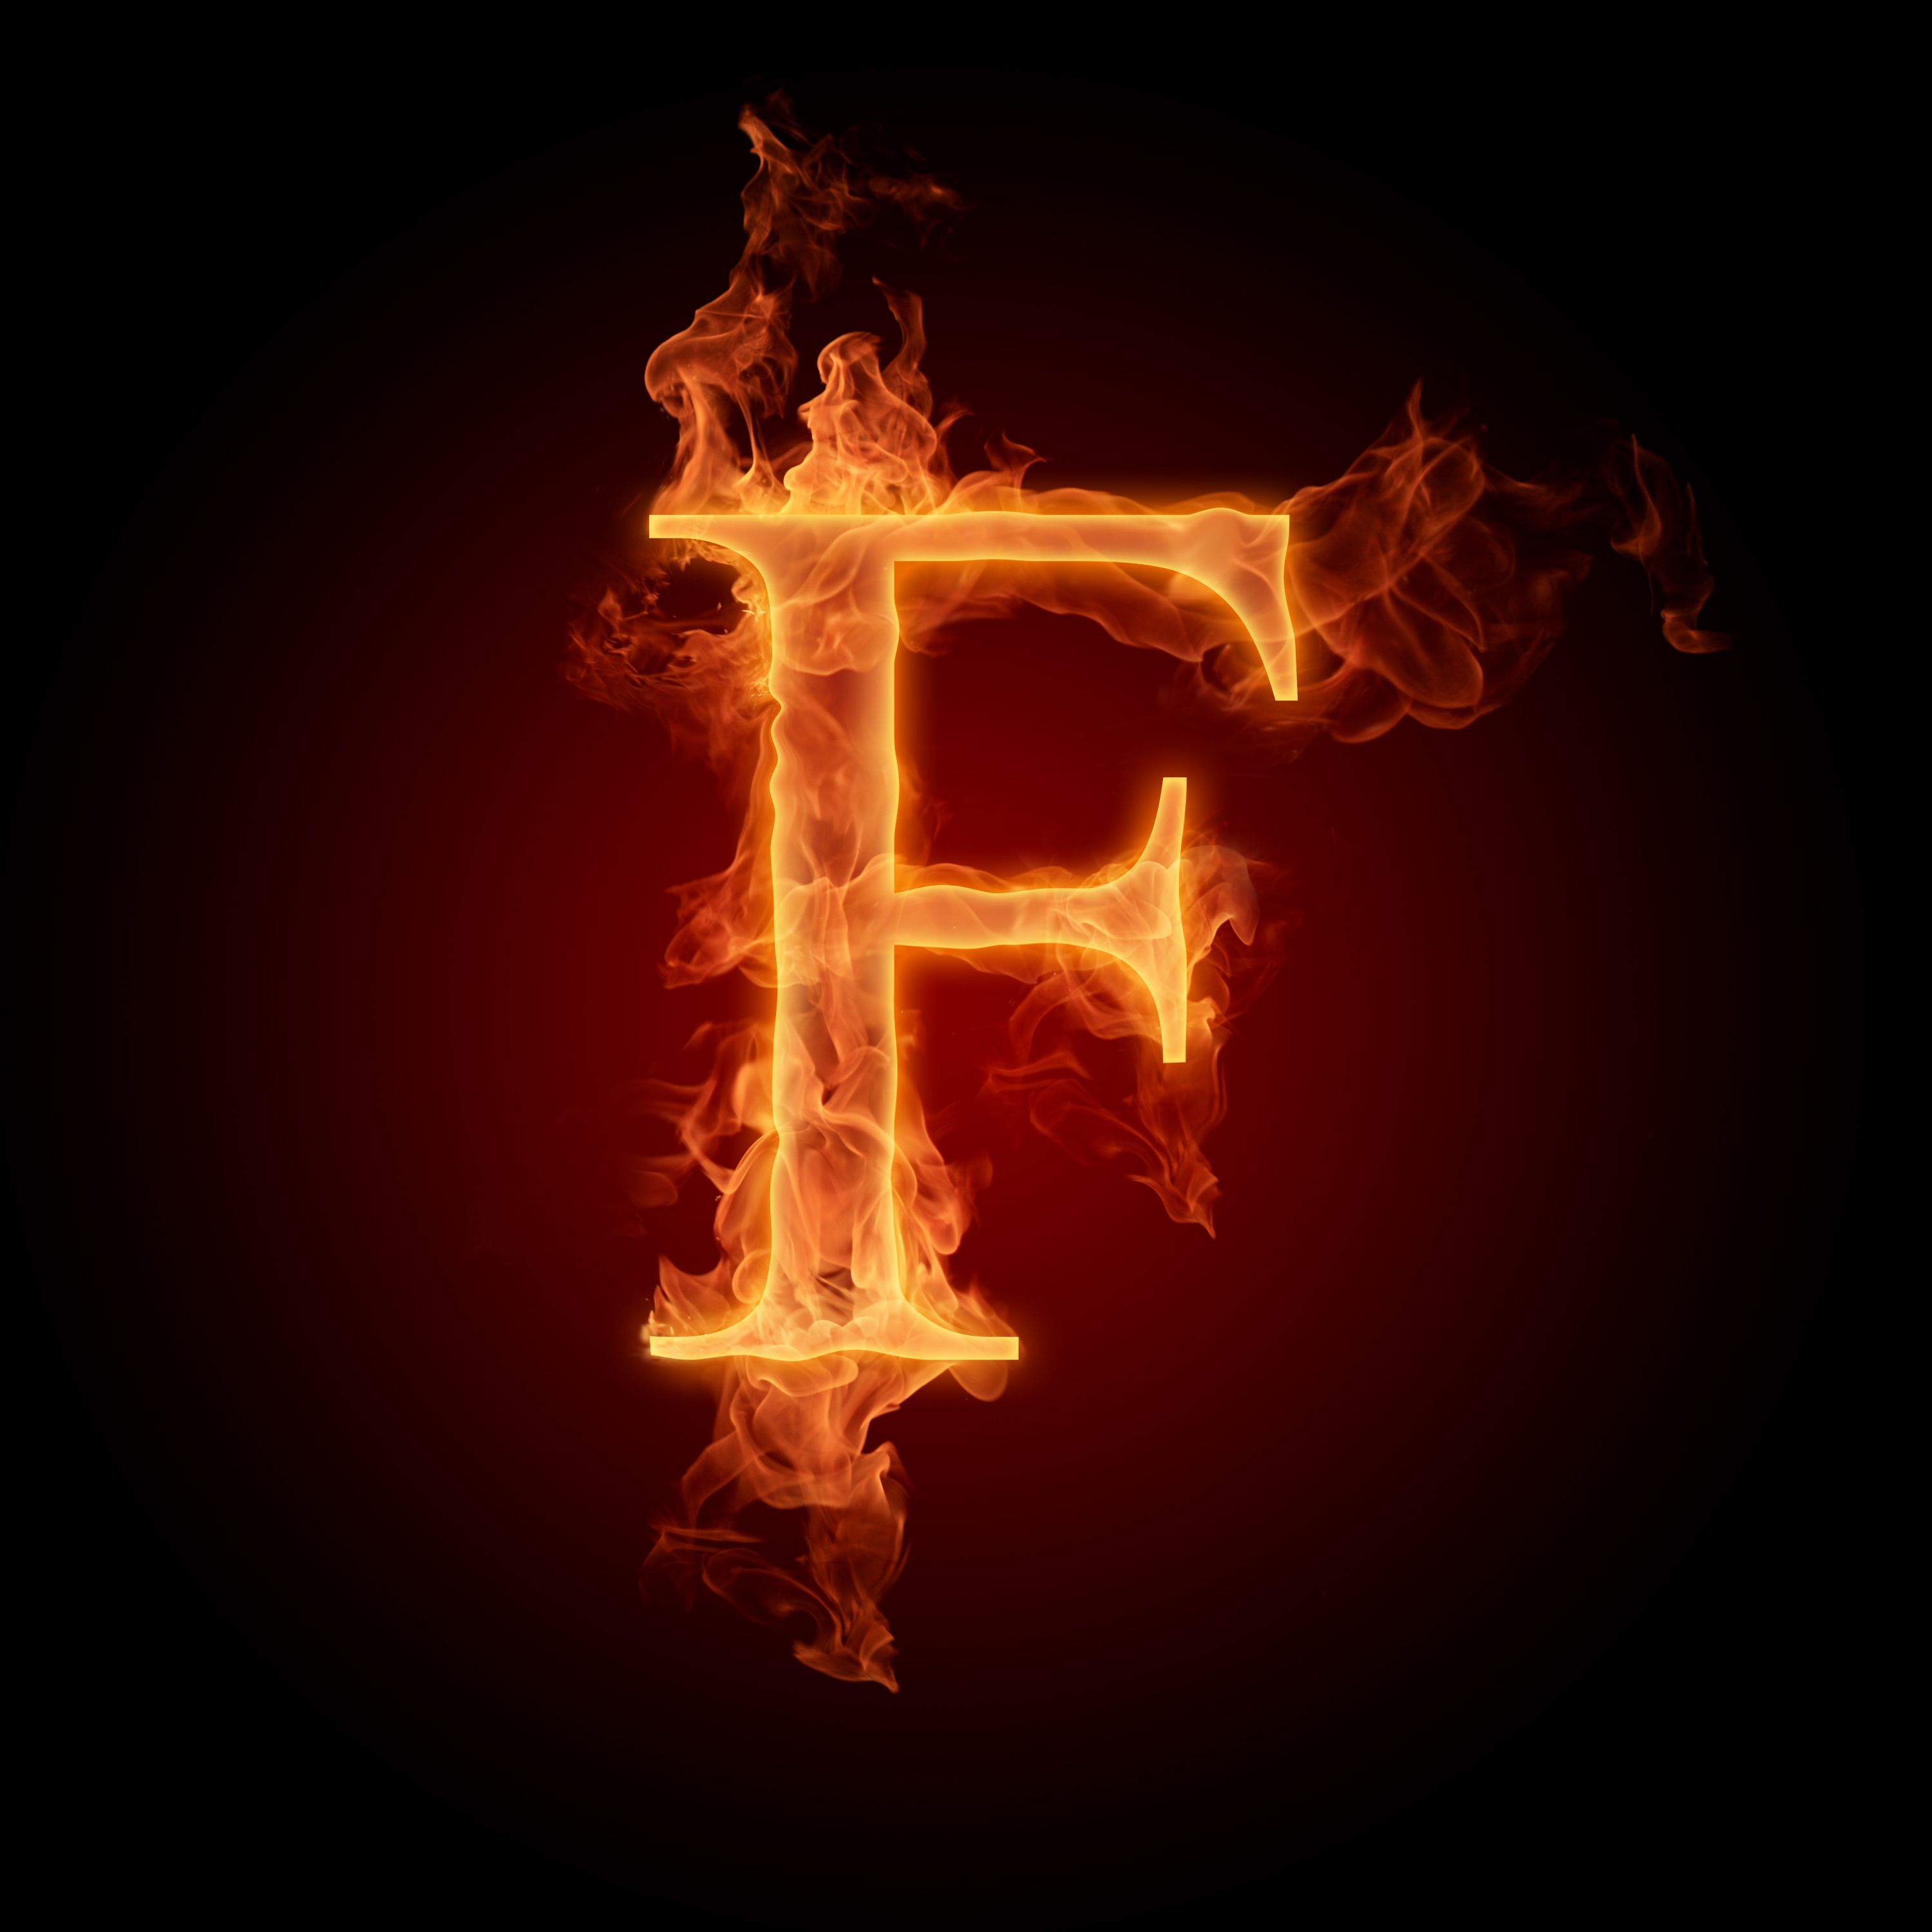 F Fire letters hd wallpapers | Only hd wallpapers